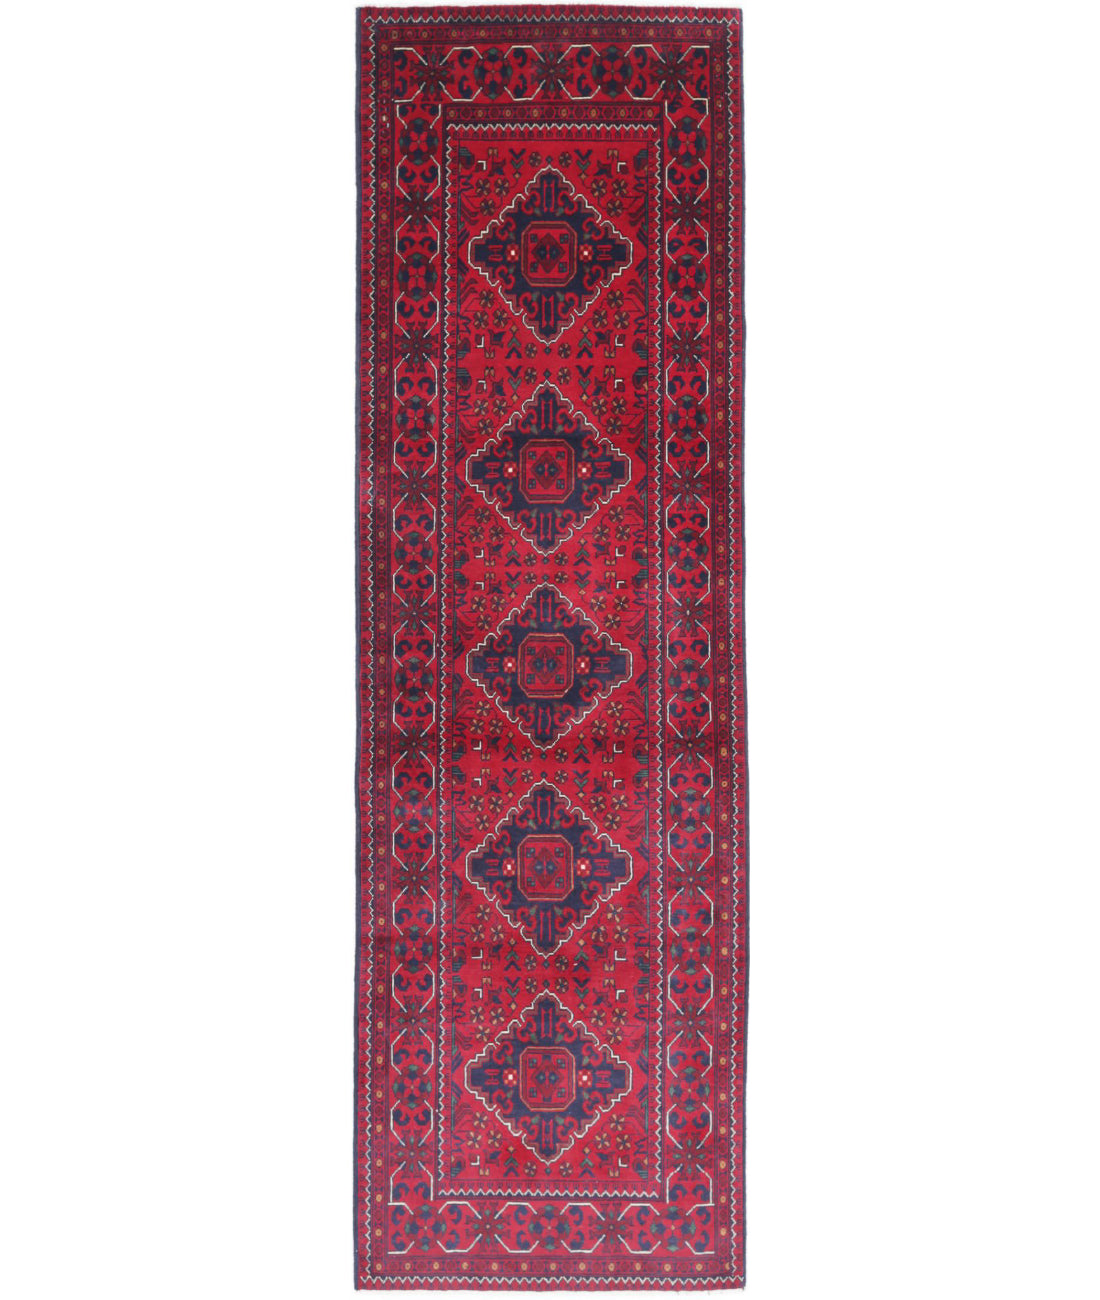 Afghan 2'8'' X 9'3'' Hand-Knotted Wool Rug 2'8'' x 9'3'' (80 X 278) / Red / Black